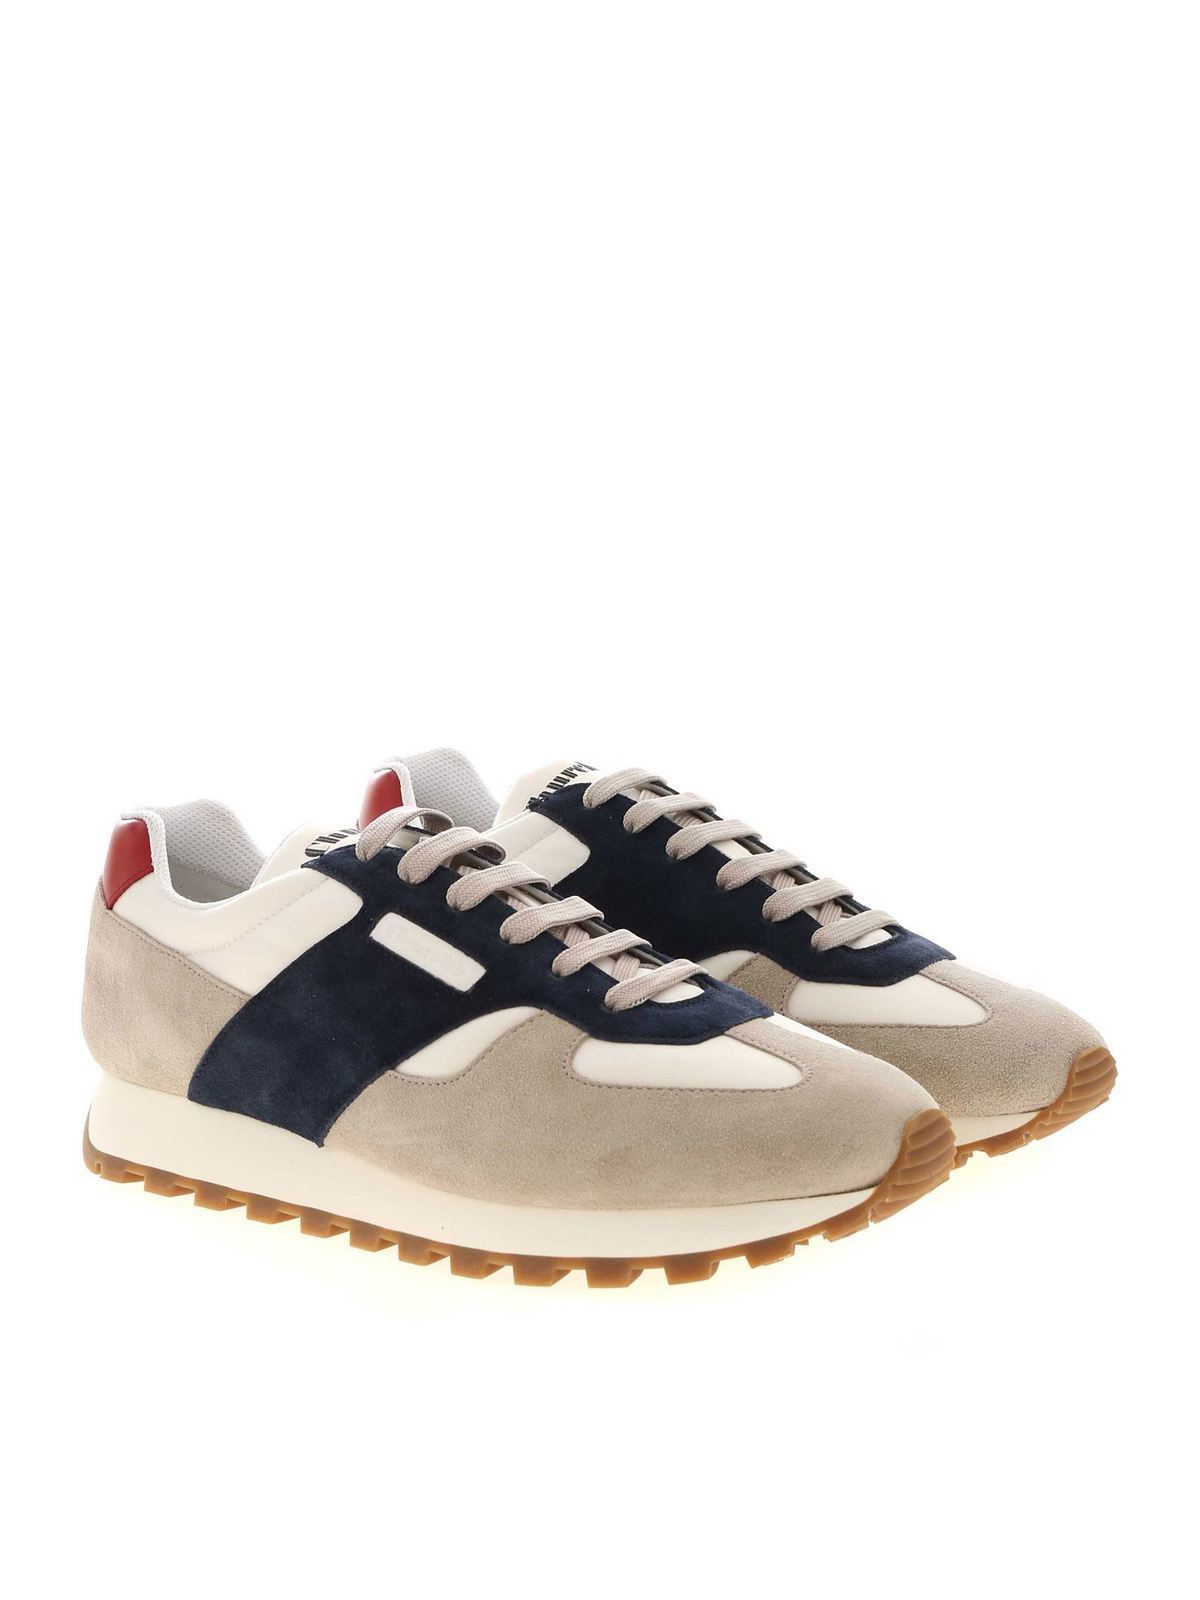 Trainers Church's - Dalton sneakers in white and blue -